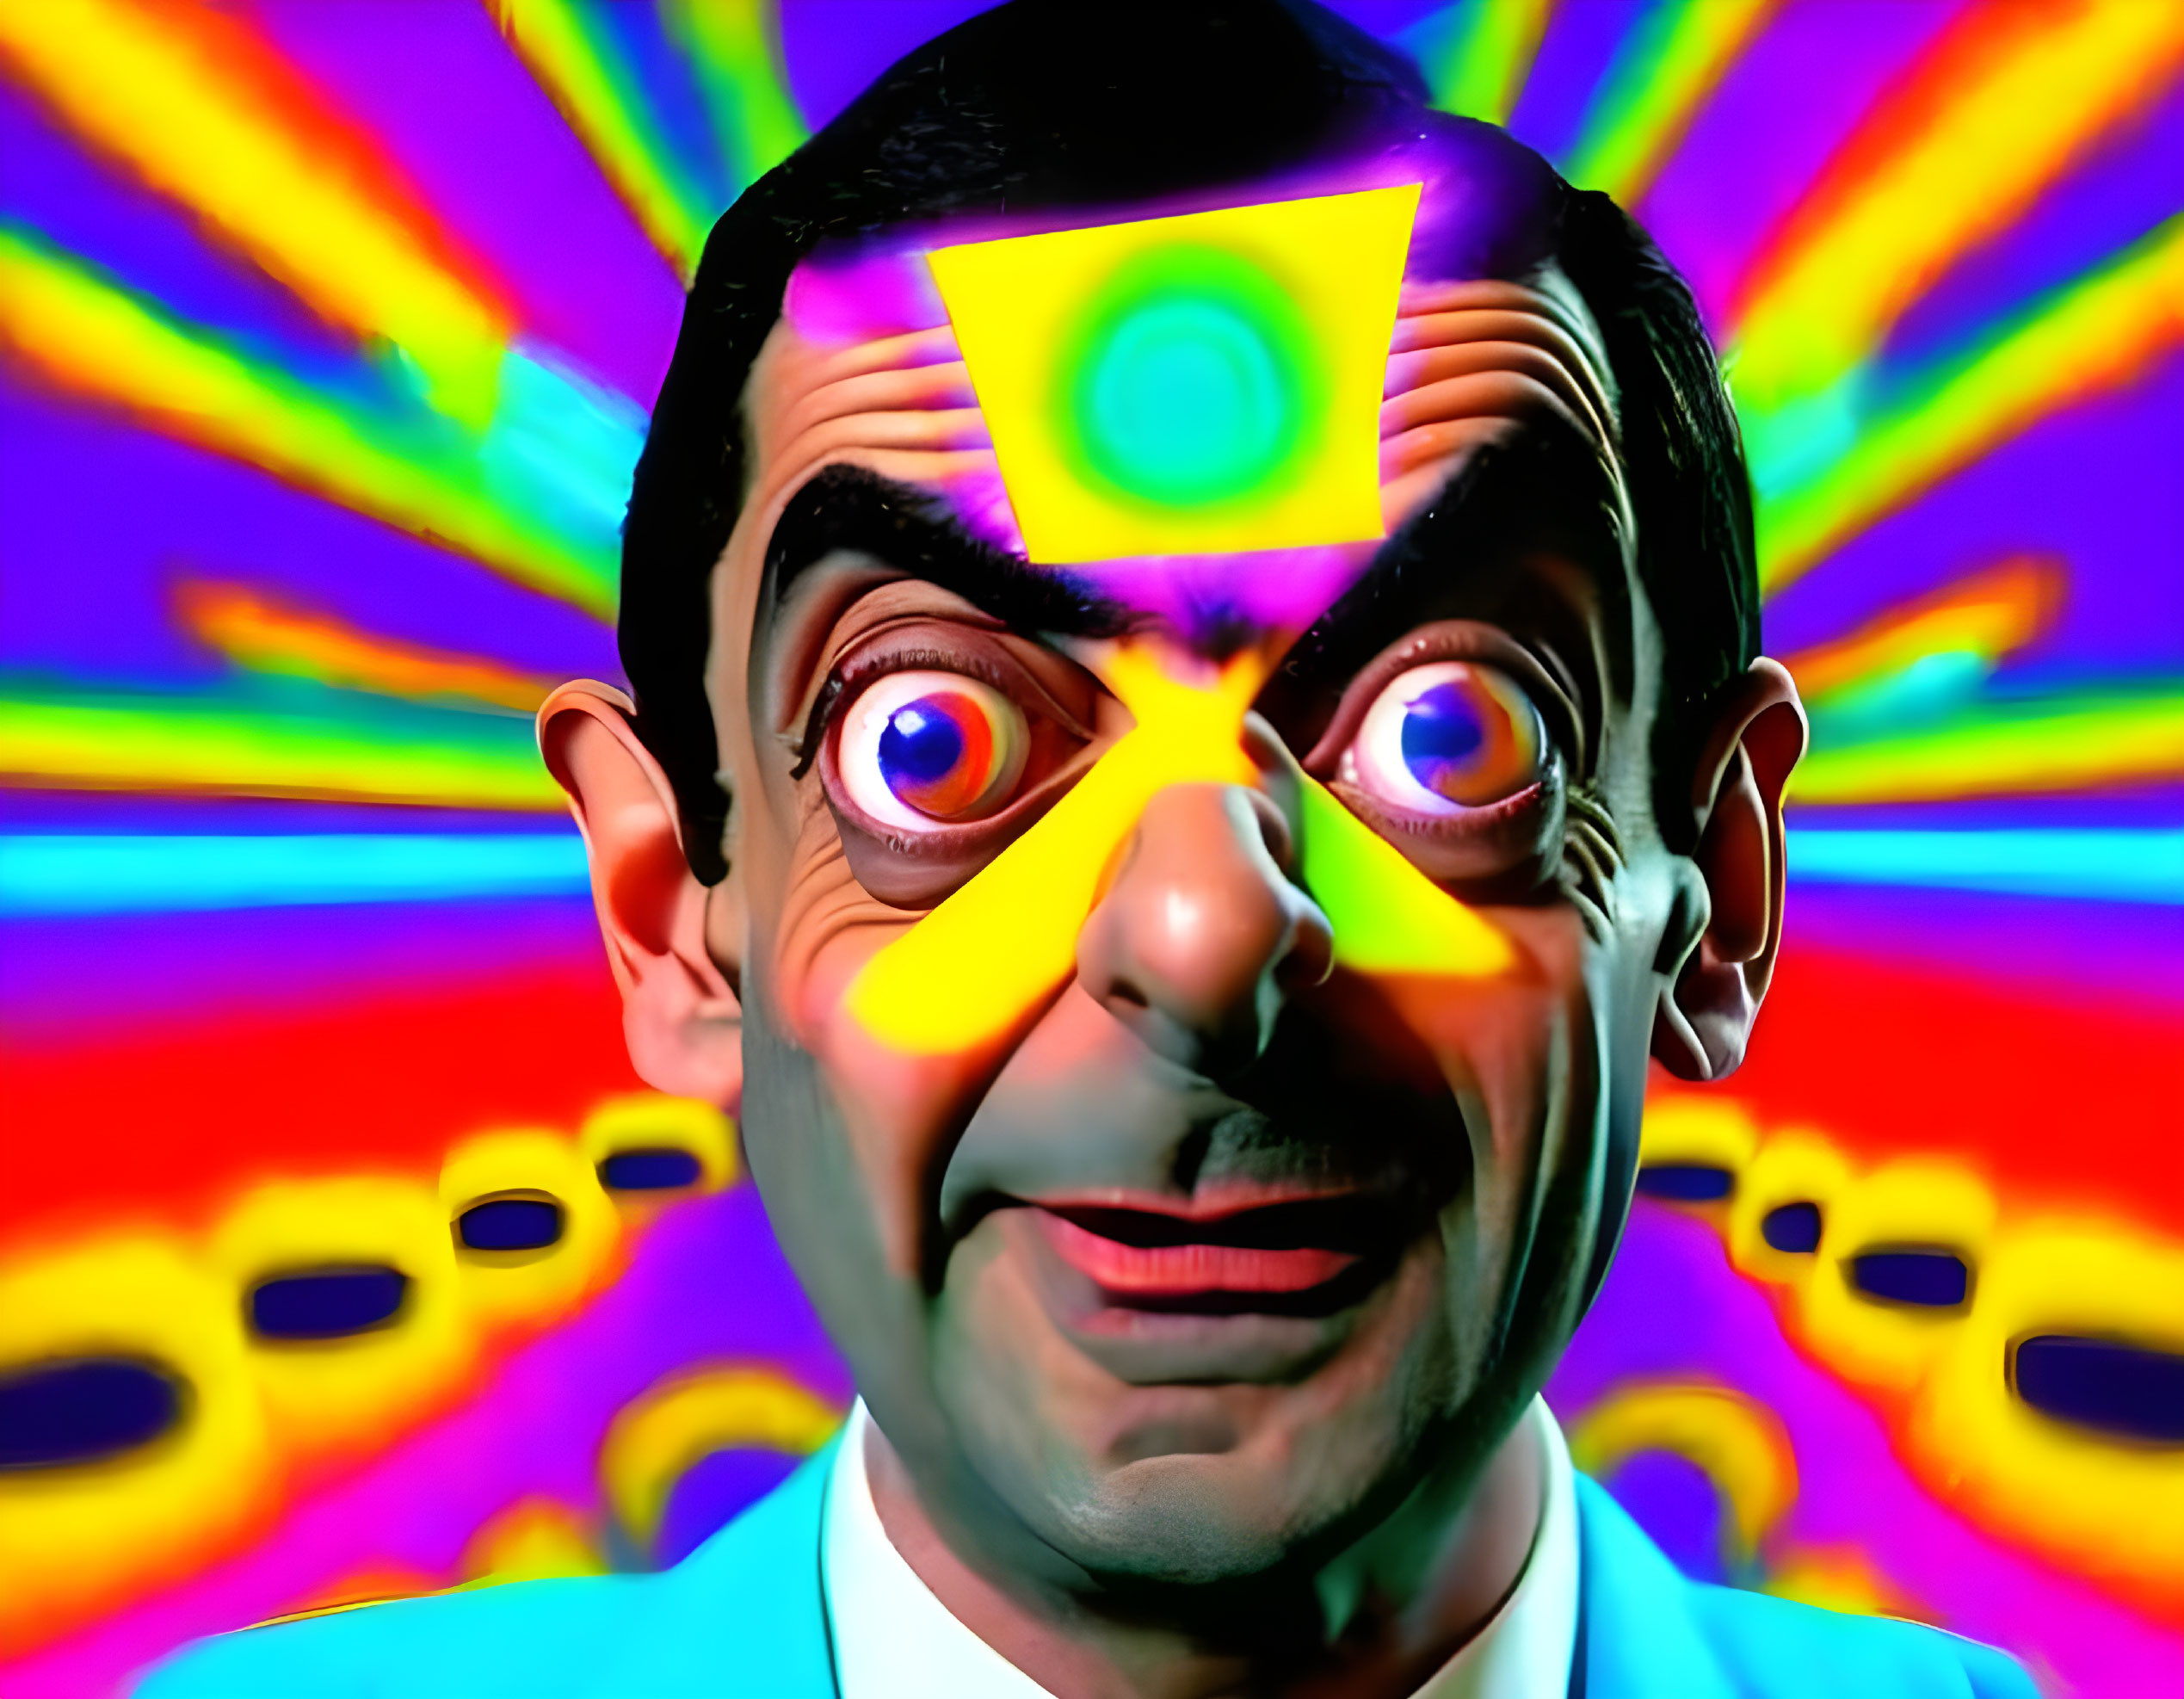 The illusion of reality. Mr.Bean style.